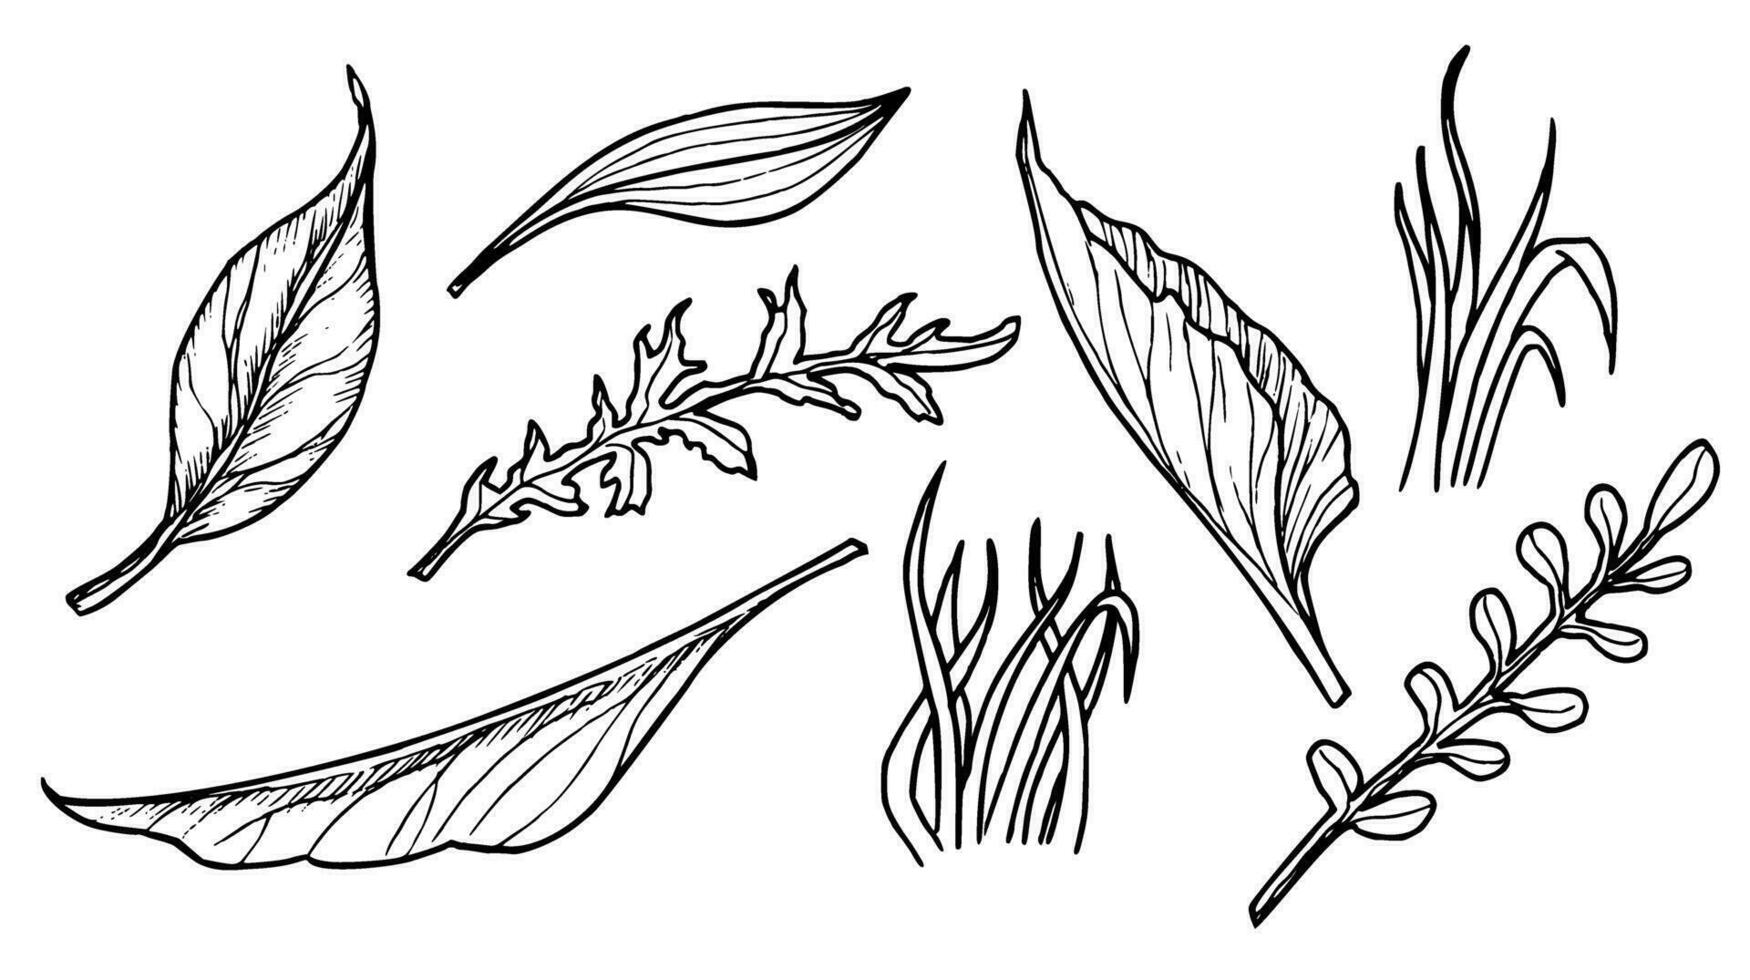 Set of forest Leaves. Hand drawn vector illustration of woodland plants in line art style. Engraved drawing painted by black inks on white background. Botanical doodle sketch for icon or logo